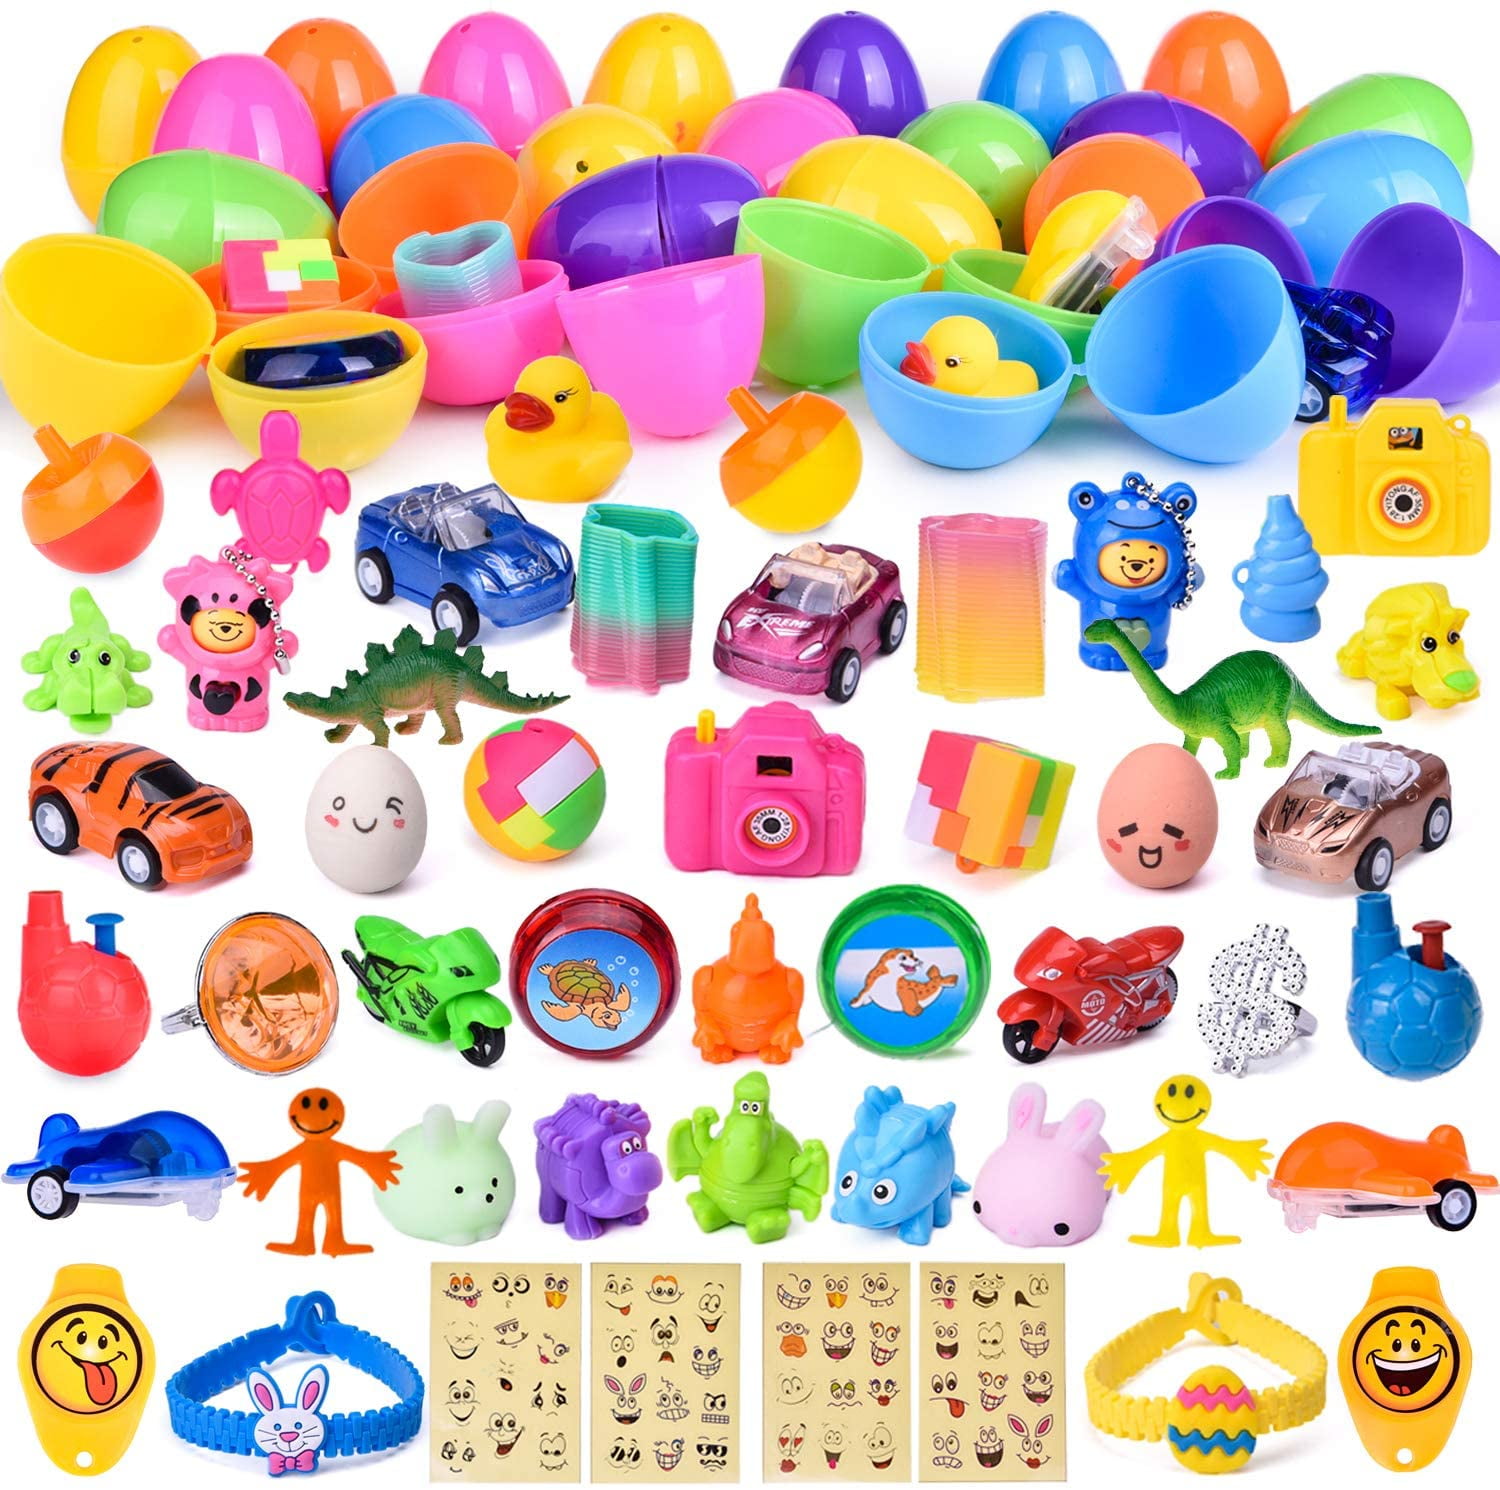 Pinata Easter Eggs Games Props Candy Snack Storage Egg Toys for Childrens Birthday Party Supplies Easter Eggs Pinata Set with Stick 